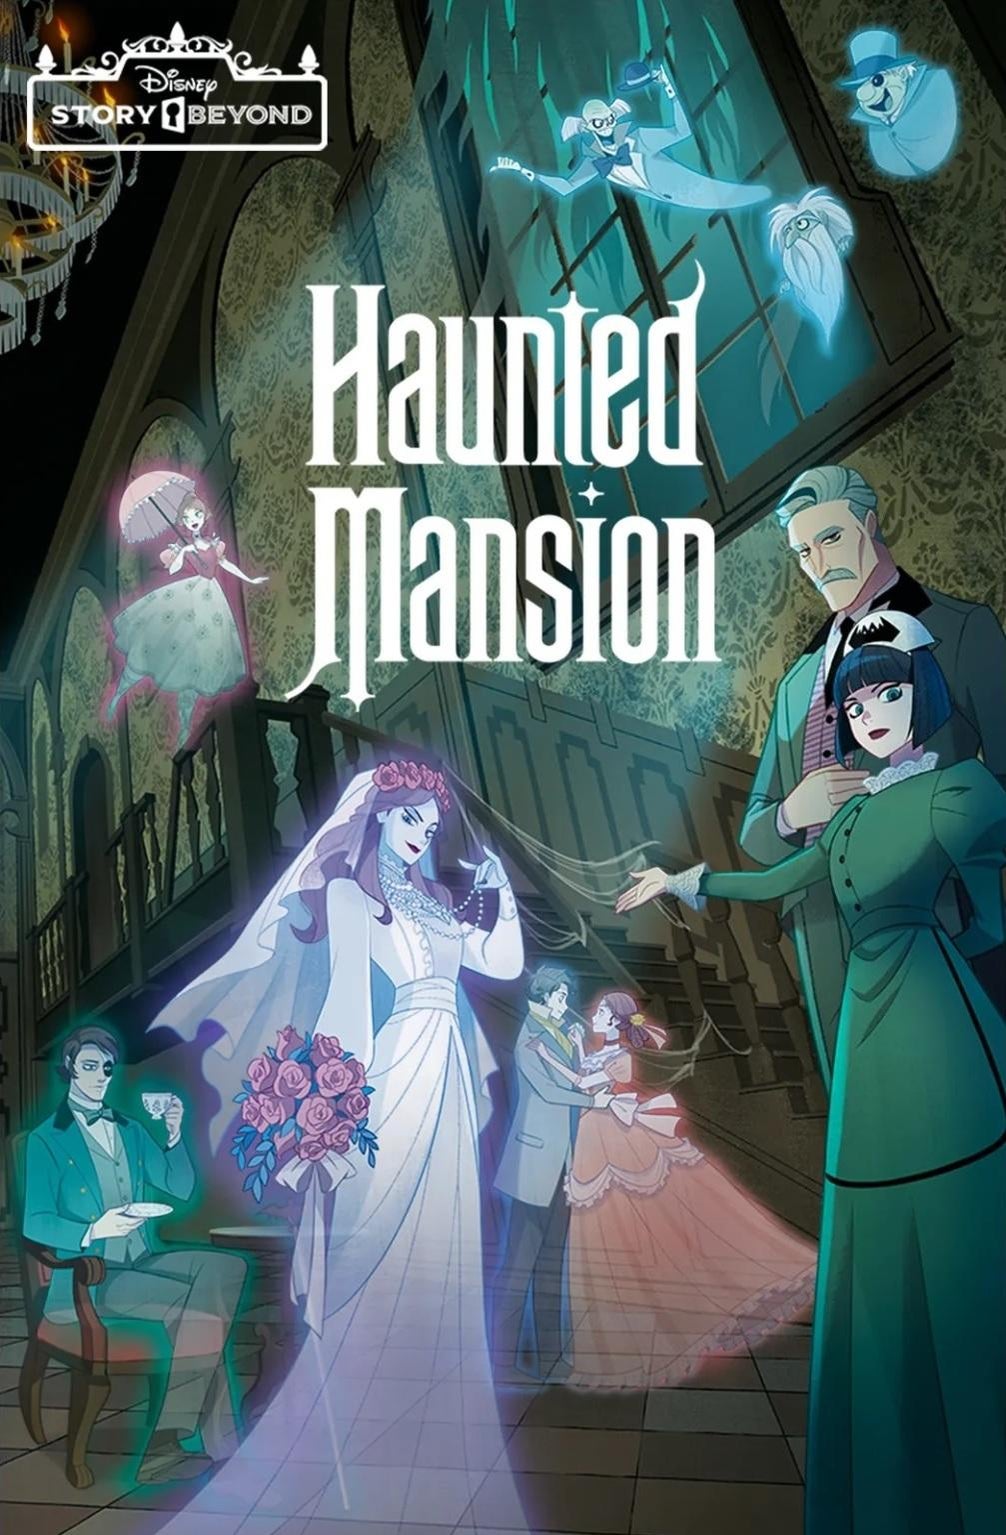 Disney's Haunted Mansion to Get an Anime Re-Theme